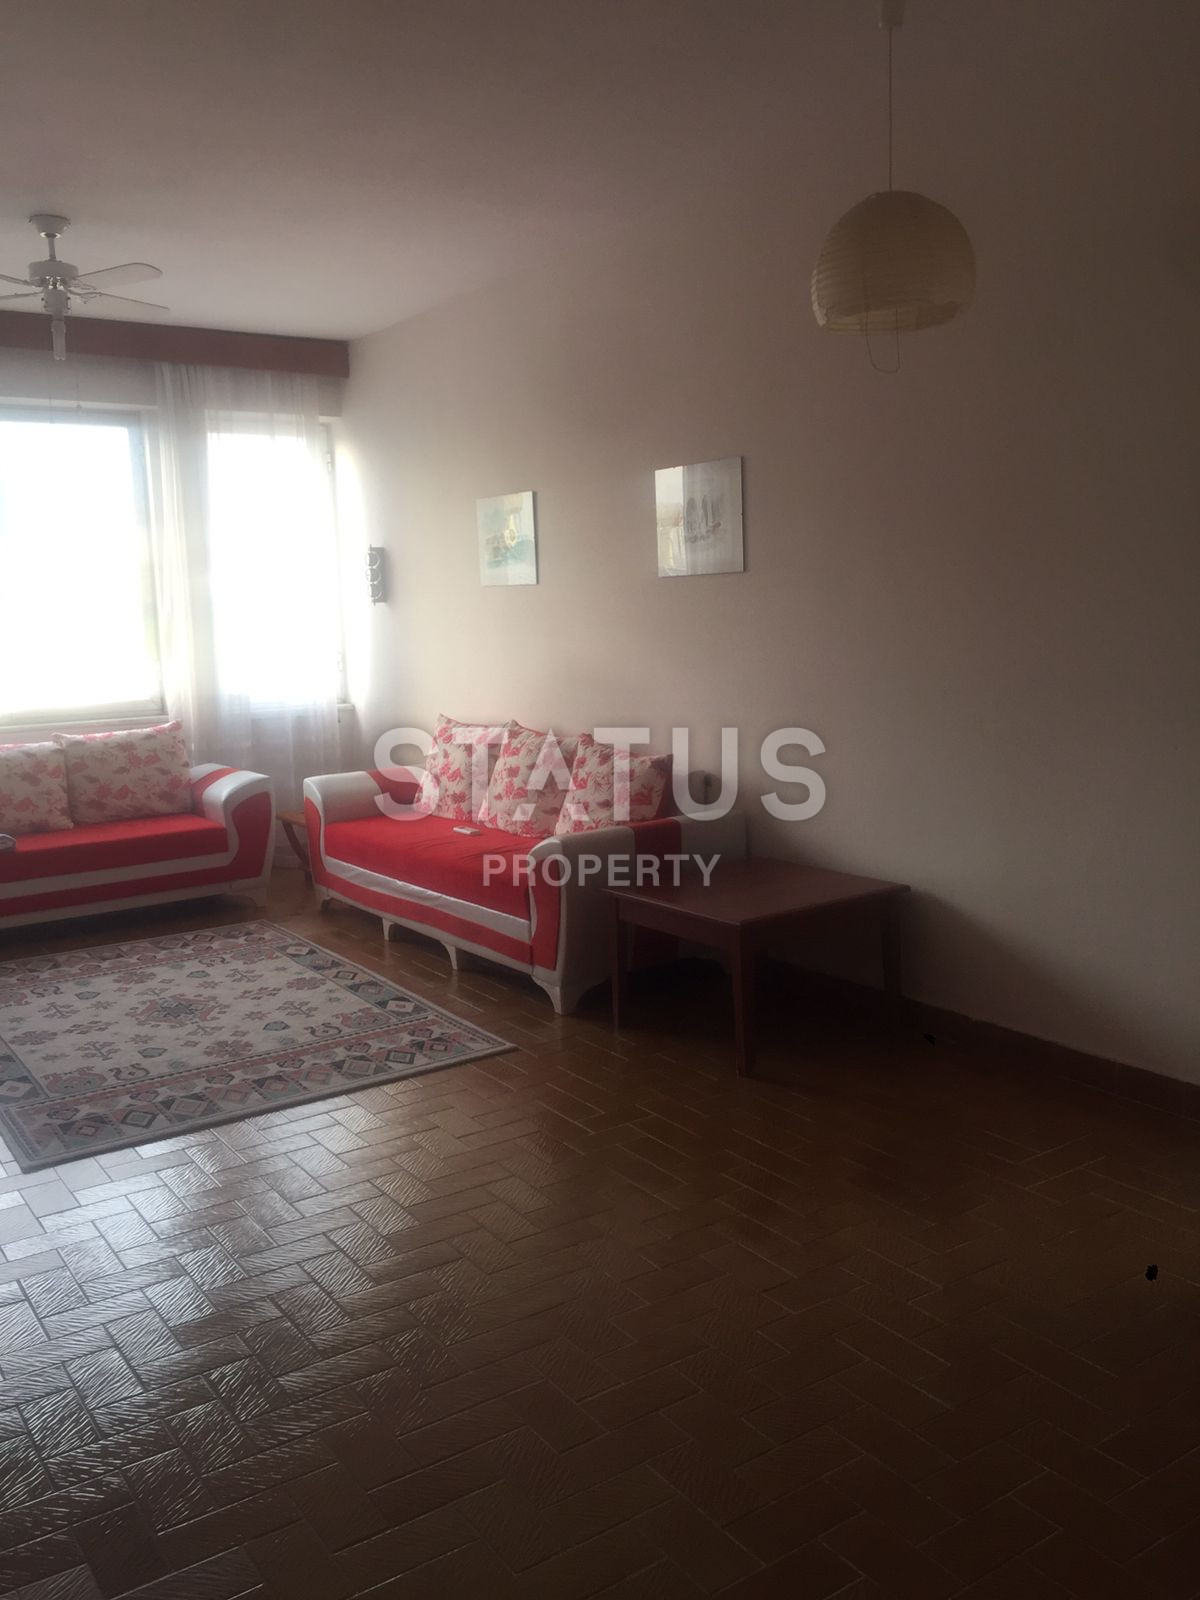 Budget spacious apartment in the center of Alanya, Cleopatra beach 150m2 фото 2